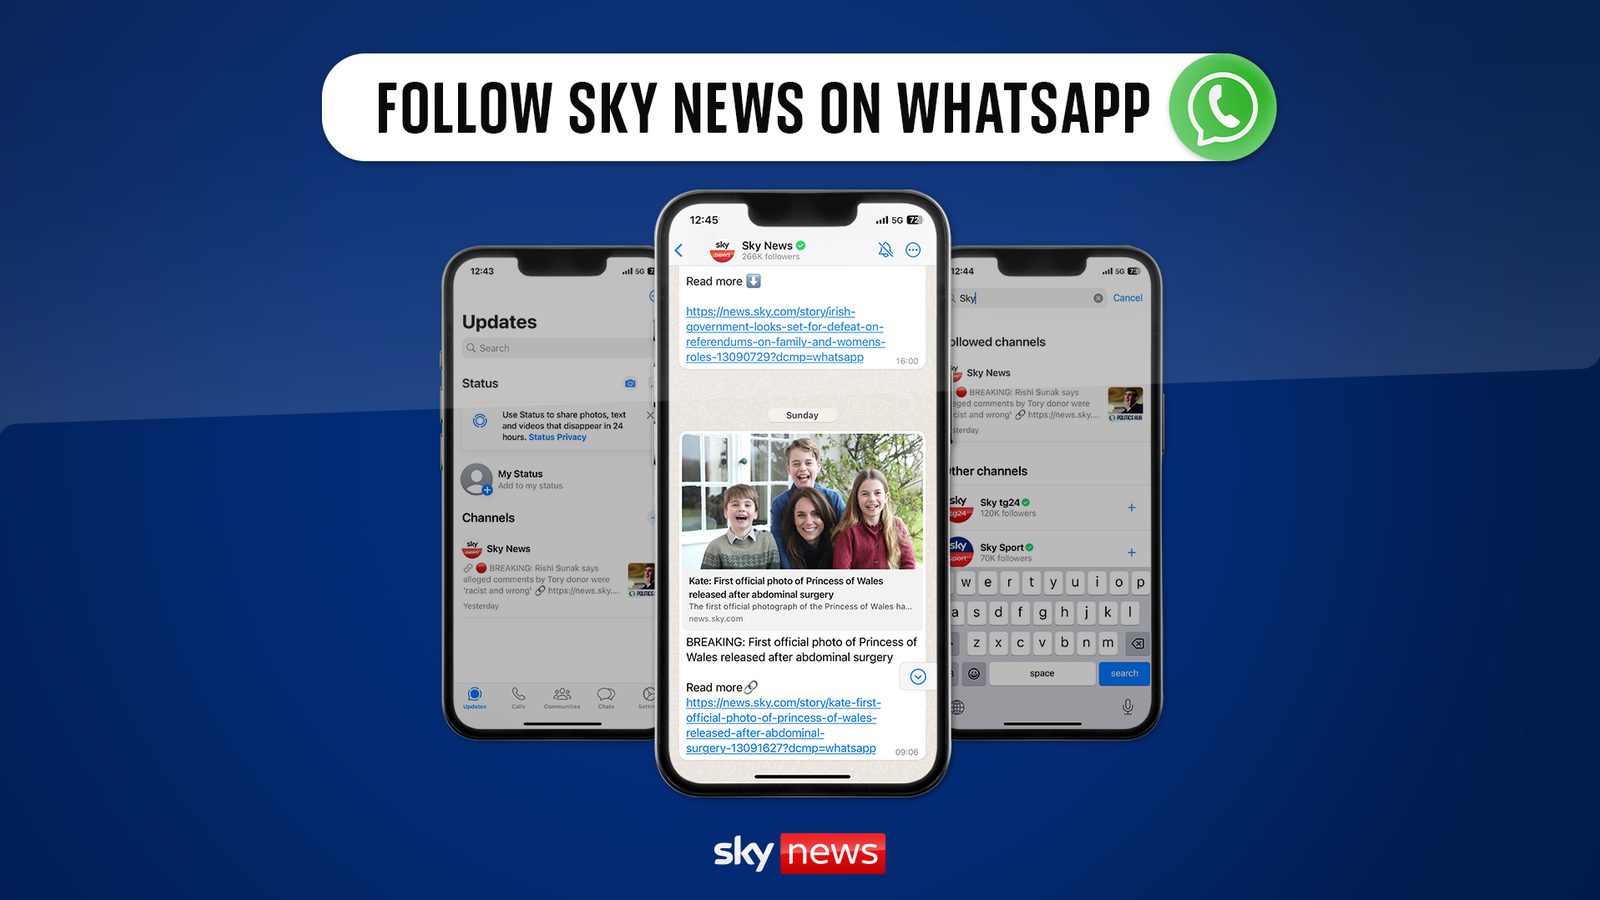 Sky News is on WhatsApp – this is how one can get our updates